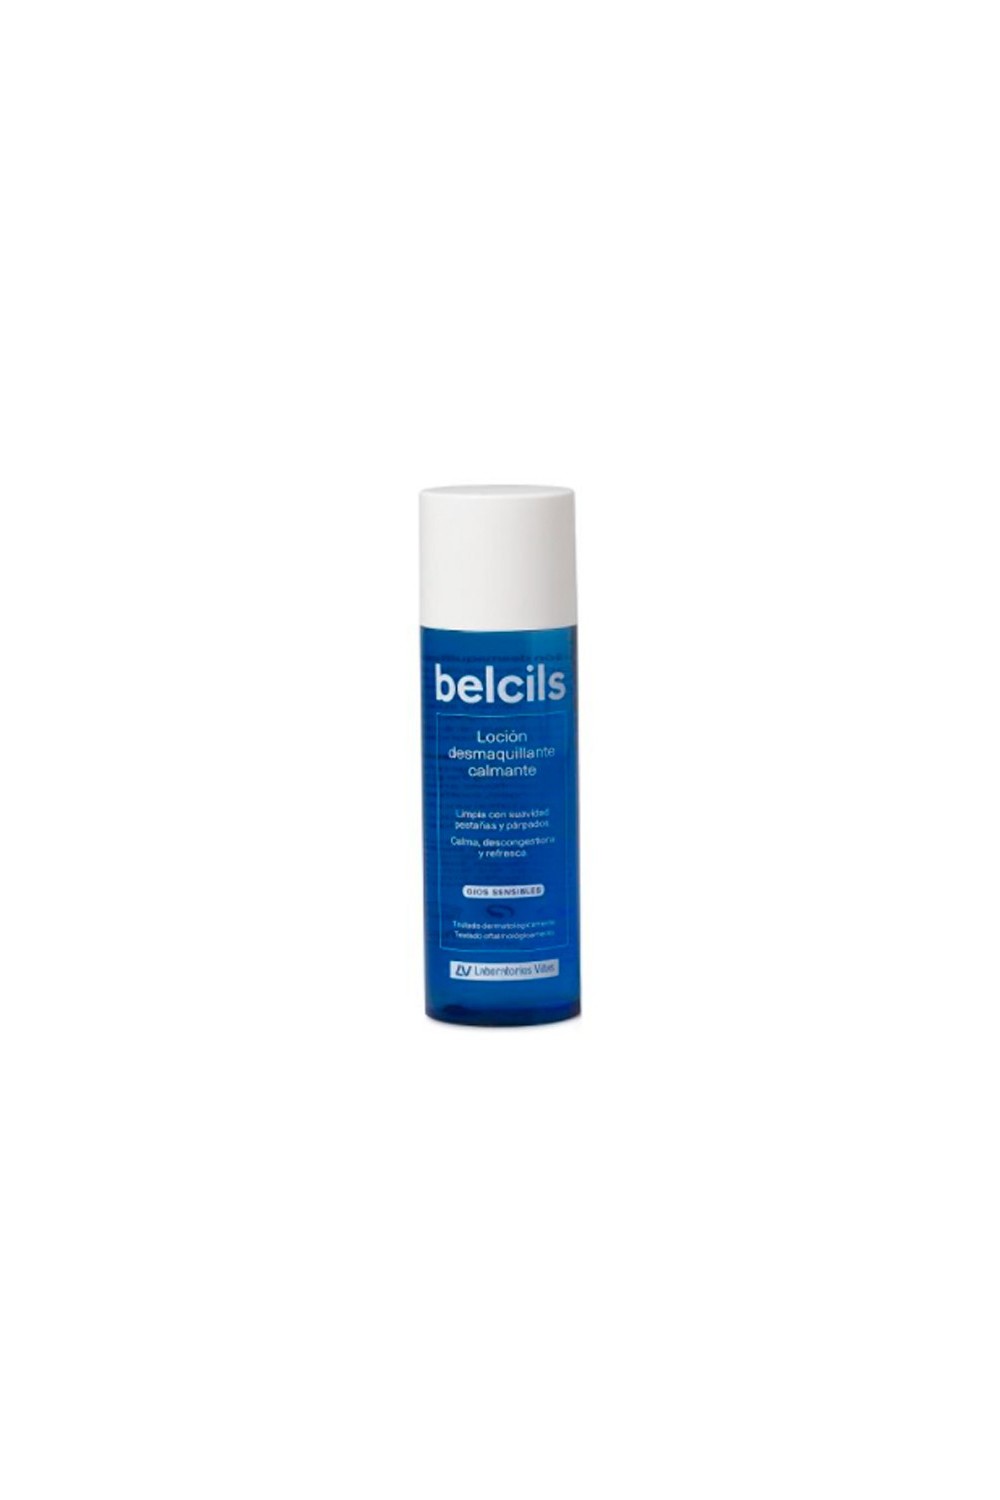 Belcils Make-up Remover Soothing Lotion 150 ml